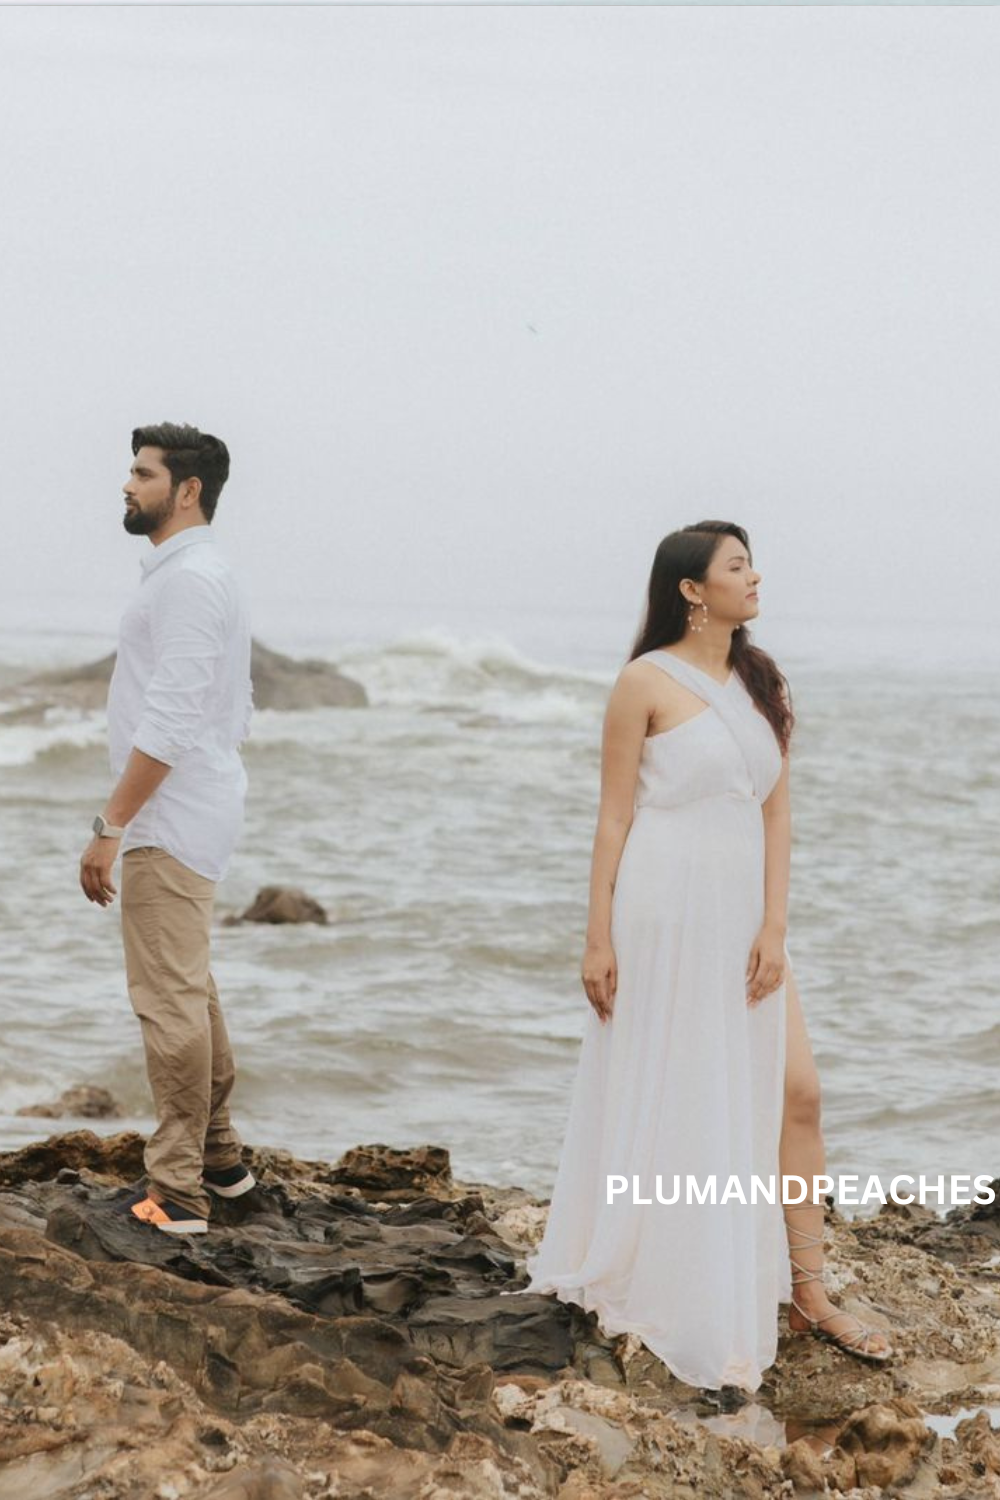 Book a pre-wedding photoshoot after considering these 8 reasons